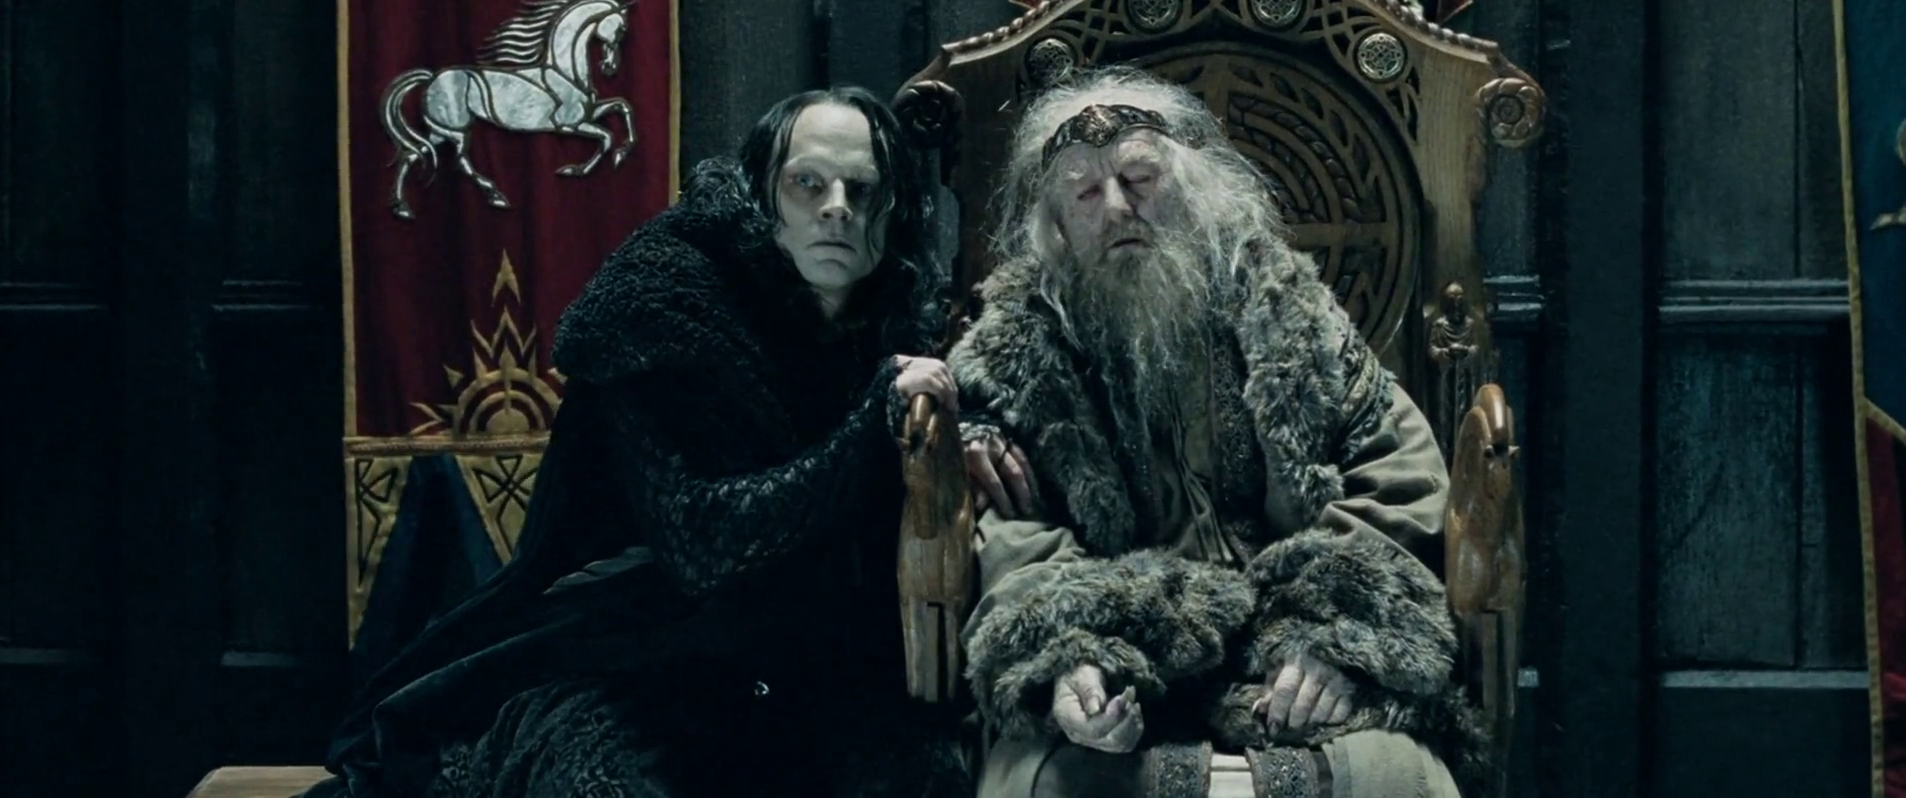 Gríma Wormtongue | The One Wiki to Rule Them All | Fandom